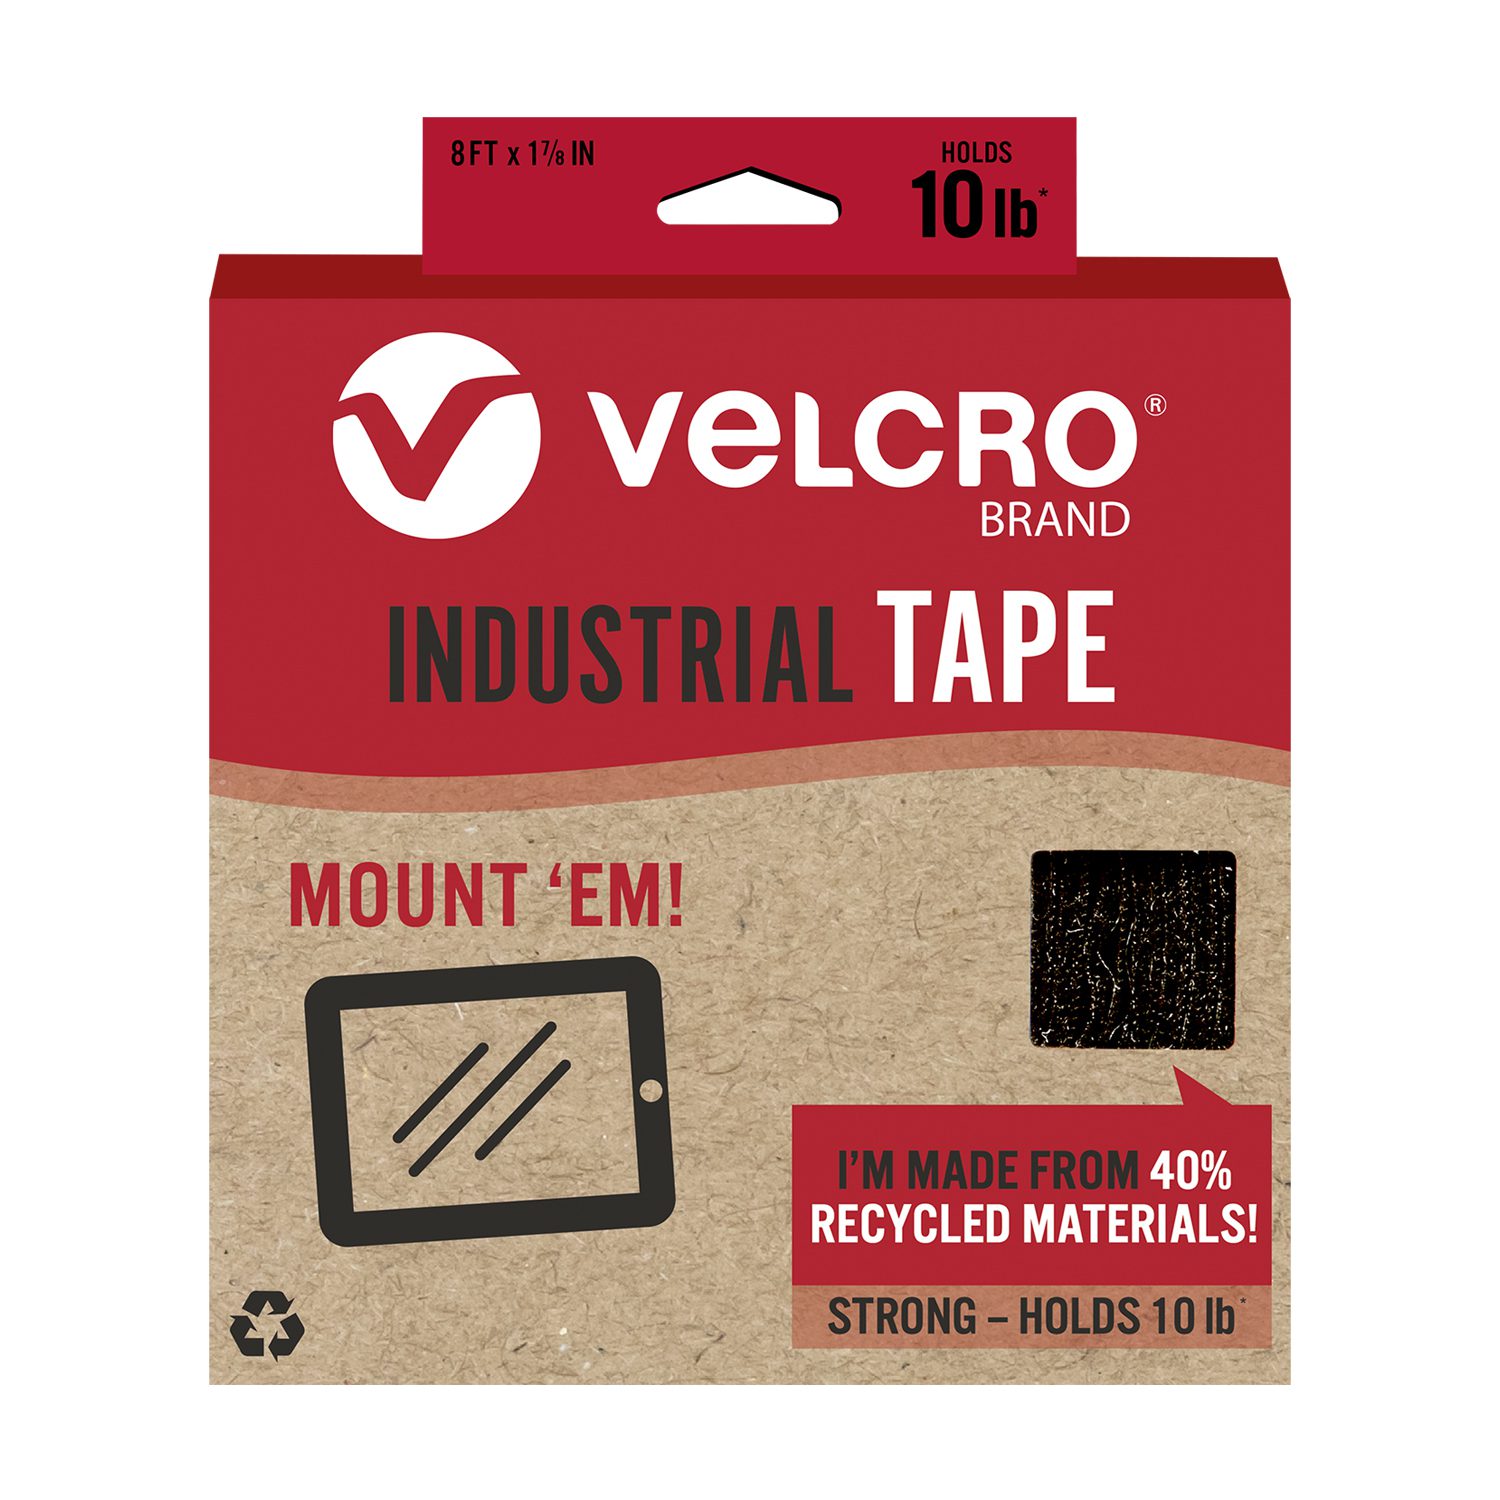 VELCRO Brand ECO Collection Sew On Tape 36in x 3/4in, Sustainable 70%  Recycled Materials, Durable and Washable, White